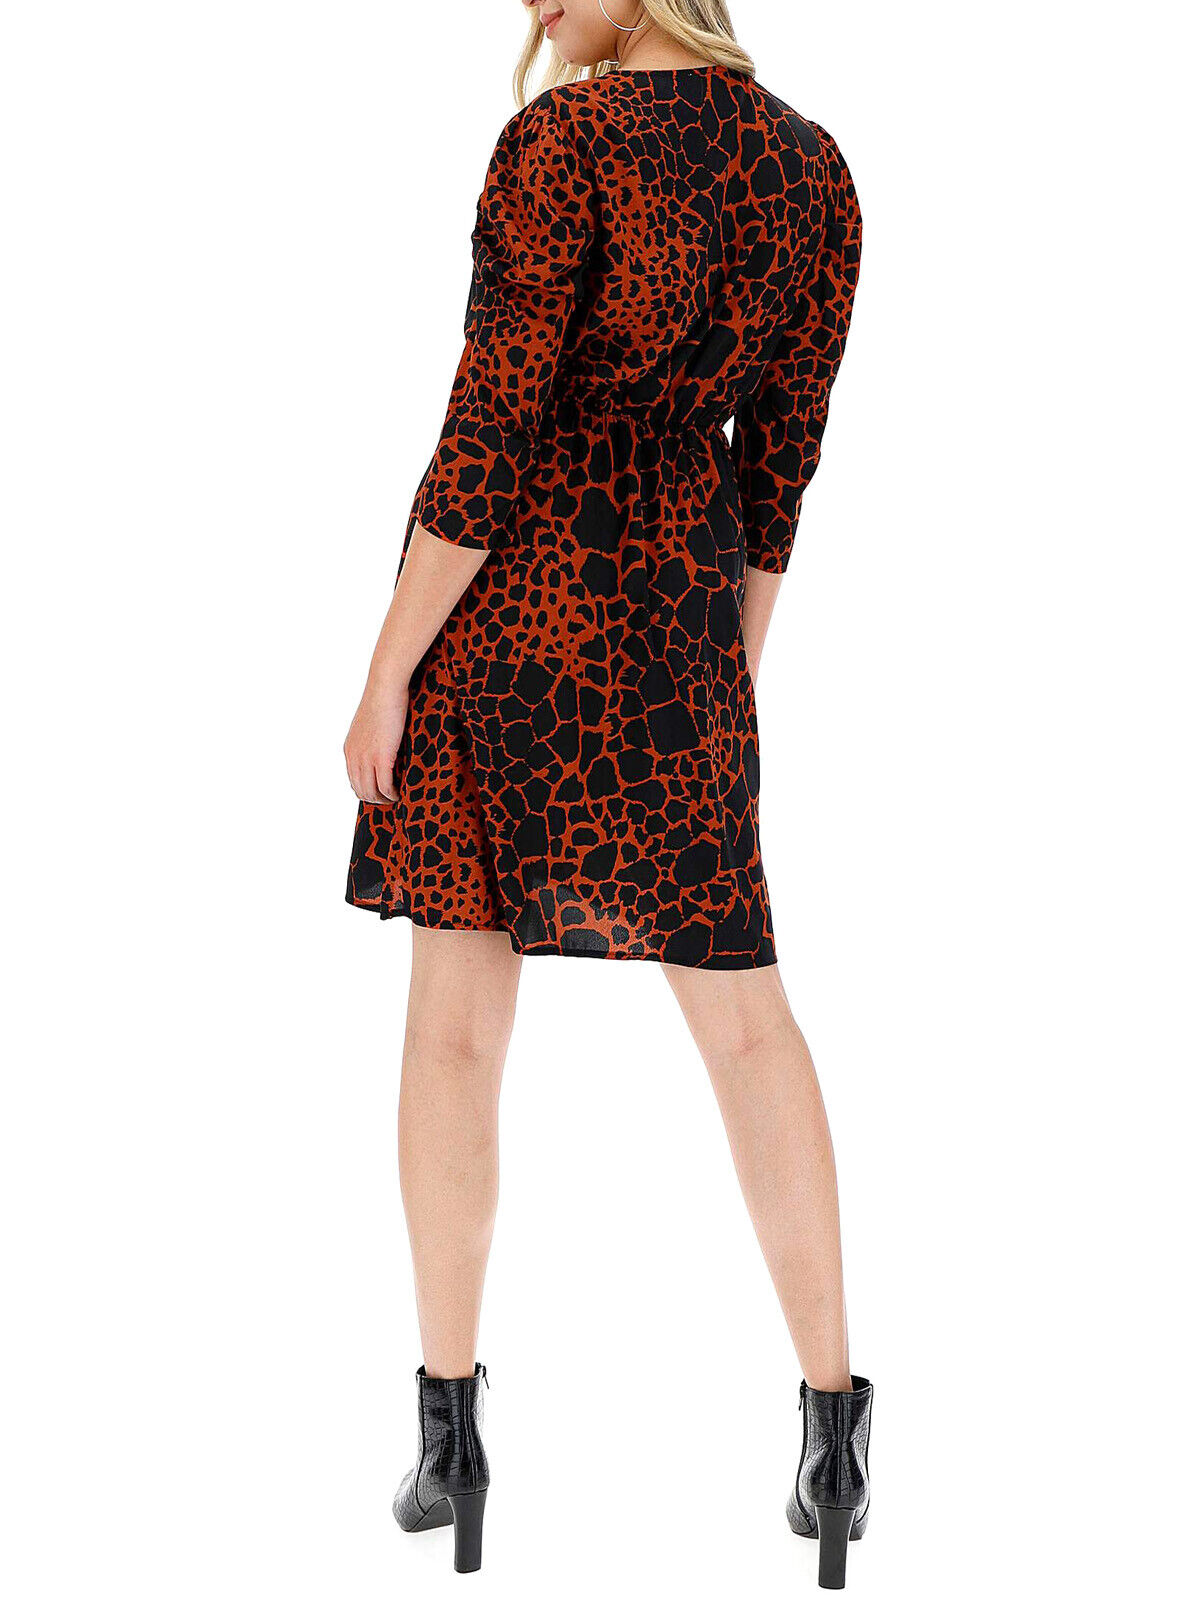 New Simply Be Black Animal Print Wrap Front Dress Sizes 16, 18, 26, 28, 32